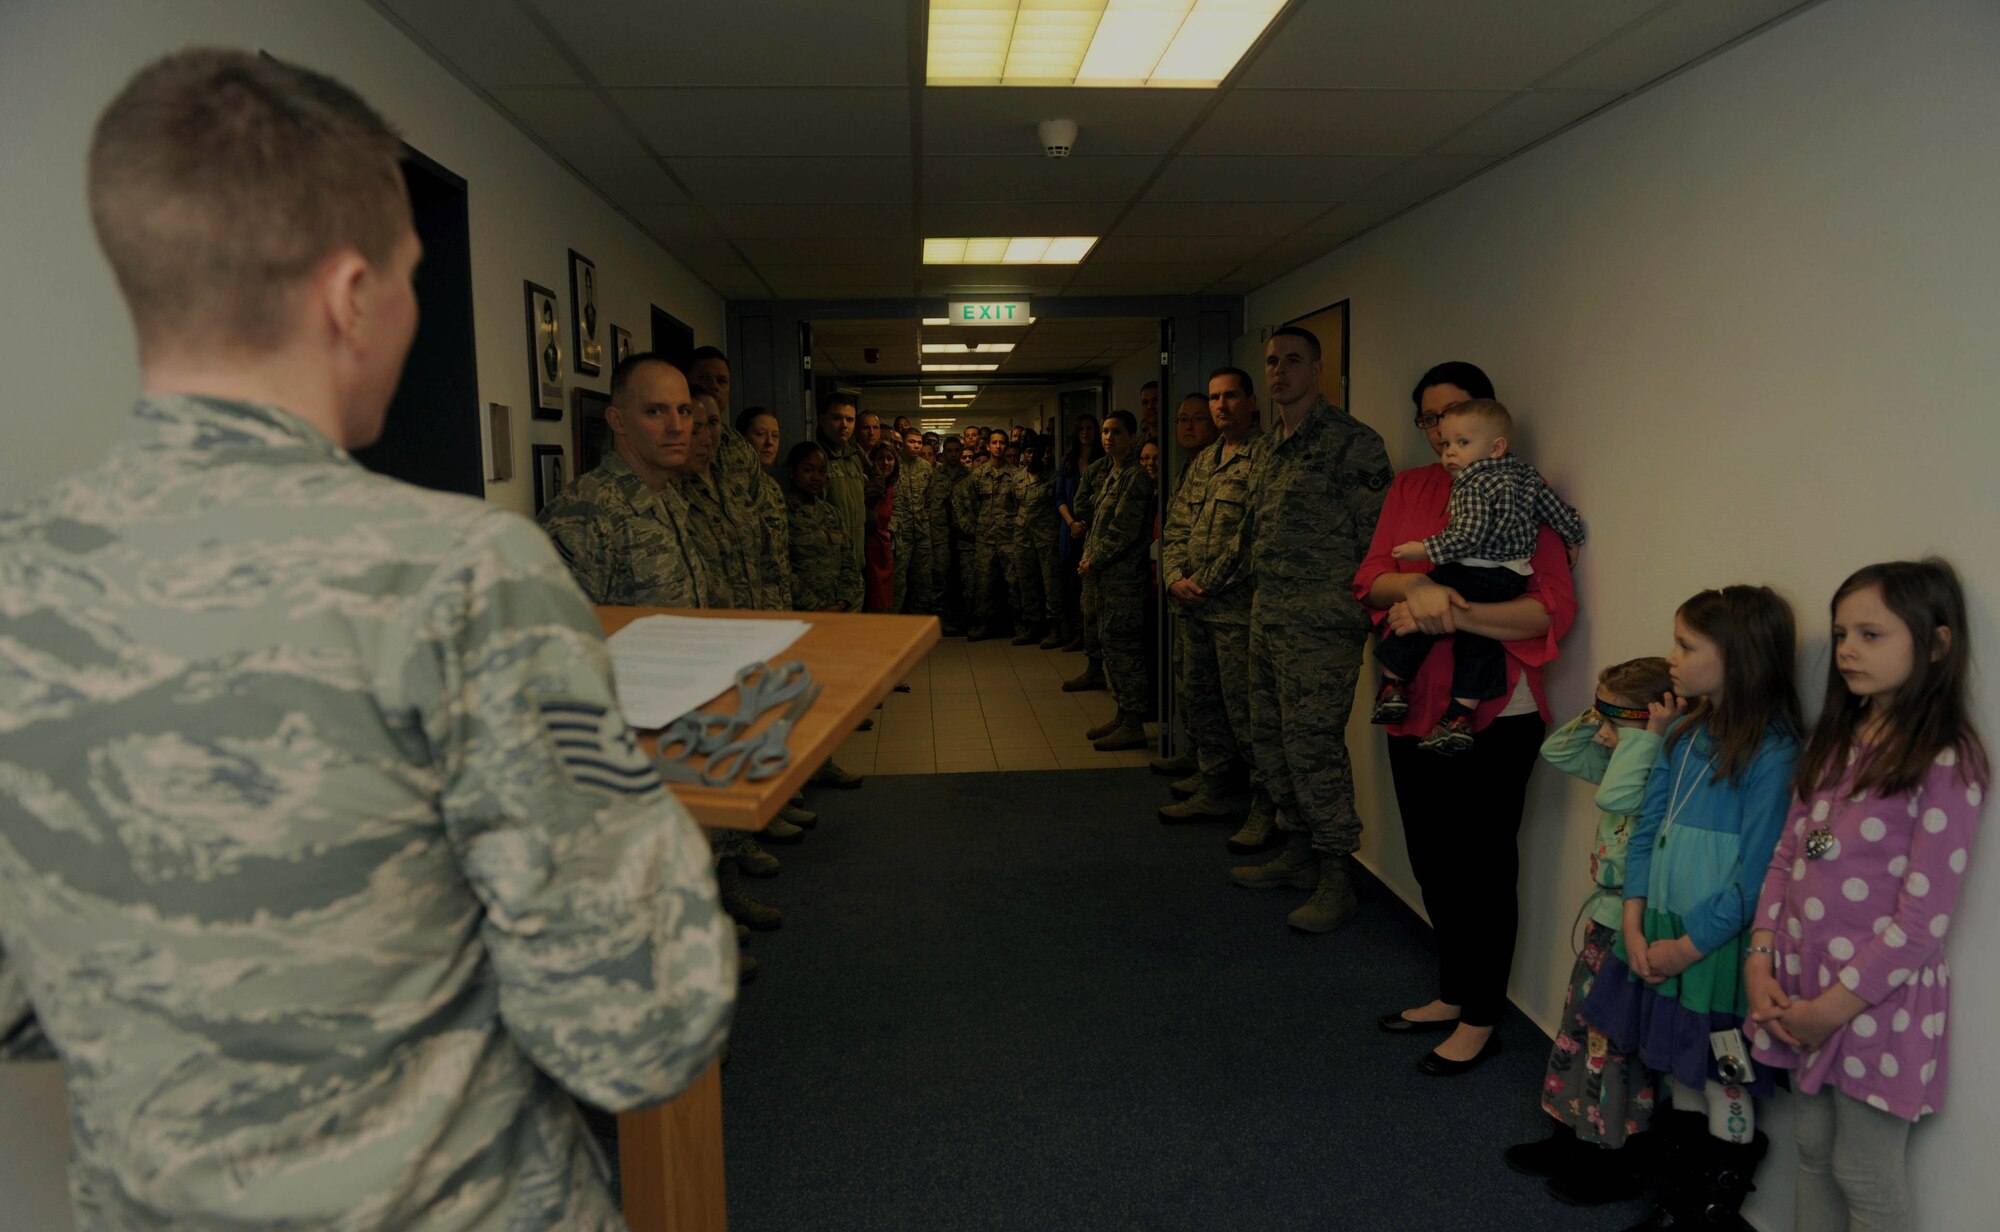 U.S. Air Force Tech. Sgt. Kalob Hinners, a Pitsenbarger Airman Leadership School instructor, left, speaks during the Pitsenbarger Heritage Room ribbon-cutting ceremony in the Pitsenbarger Airman Leadership School at Spangdahlem Air Base, Germany, March 4, 2015. Various members of the Spangdahlem community, including the 52nd Fighter Wing vice commander, Hinners’ family, ALS staff and students, attended the ceremony. (U.S. Air Force photo by Airman 1st Class Timothy Kim/Released)